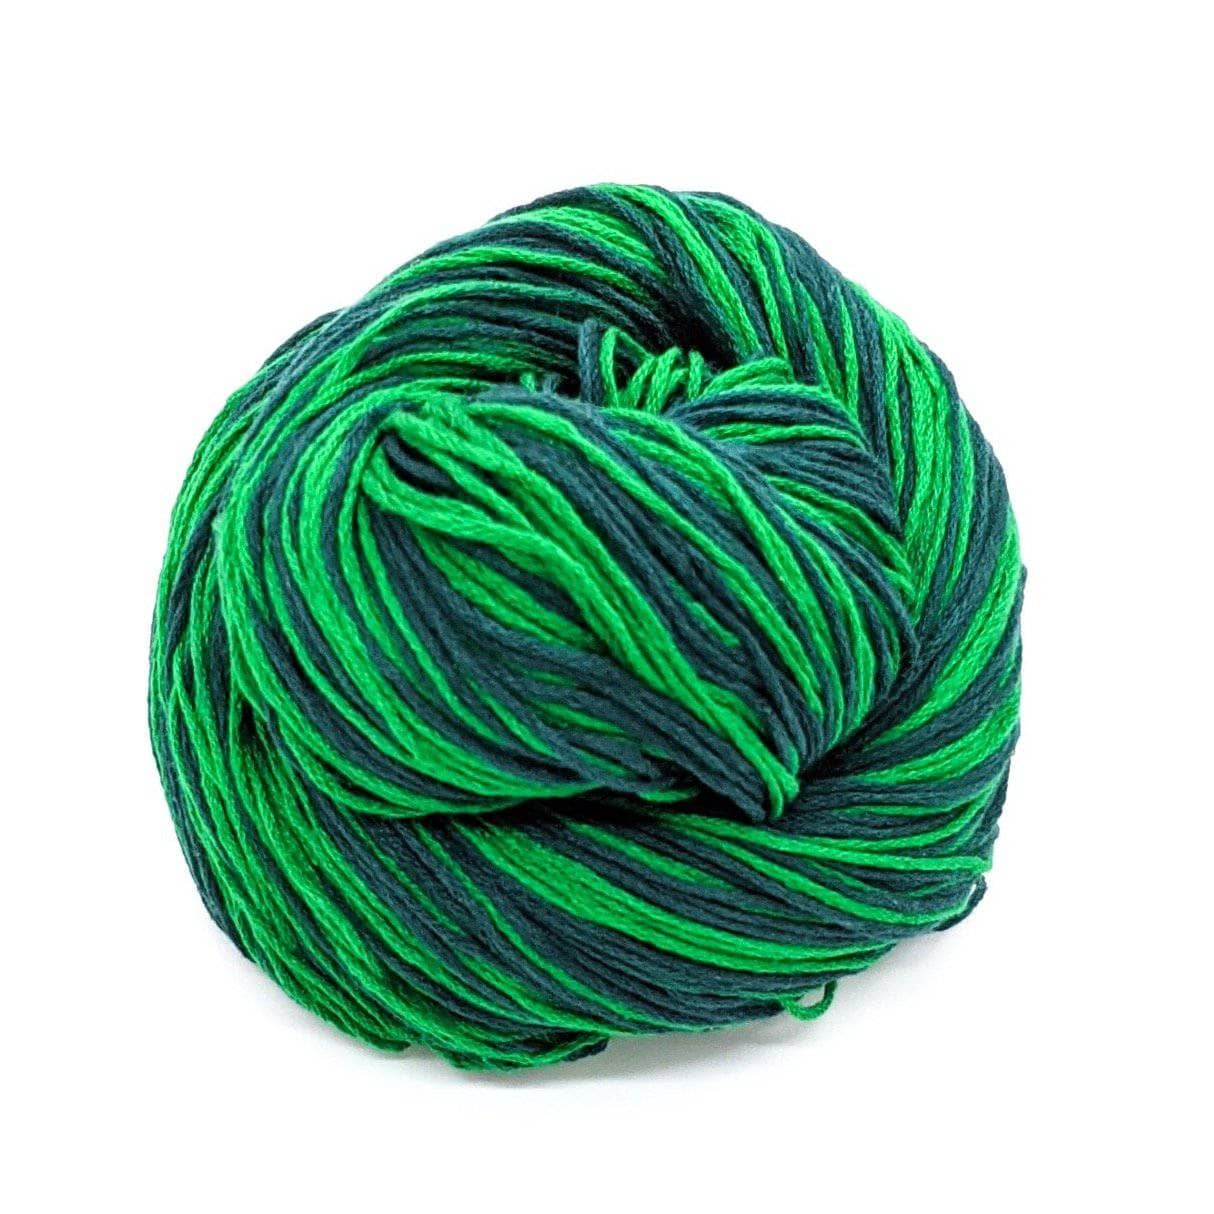 birds nested skein of mulberry silk fingering weight yarn in the colorway emerald lane (variegated emerald green and forest green) in front of a white background.